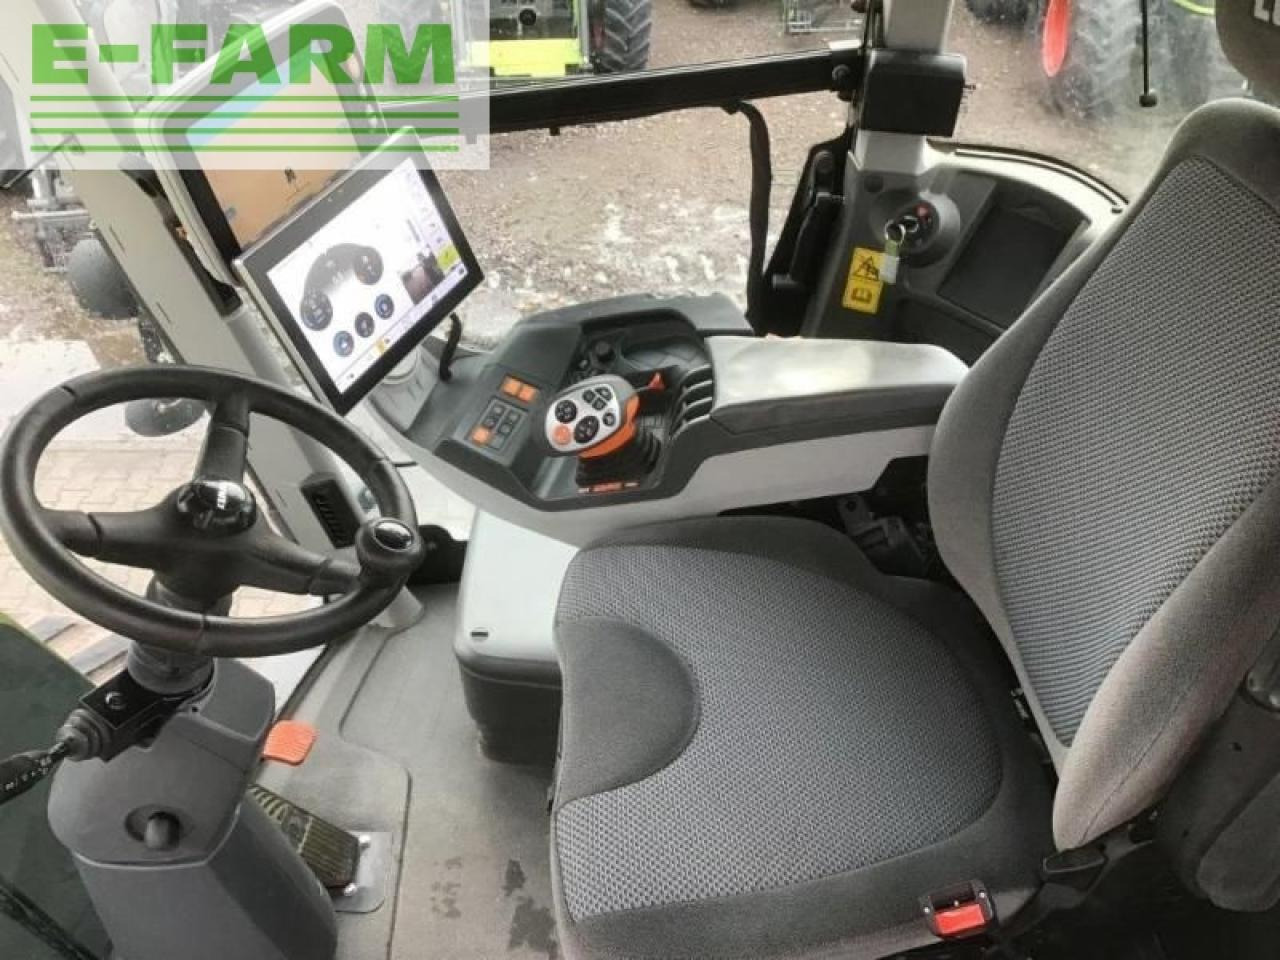 Tractor CLAAS xerion 5000 trac ts TRAC TS